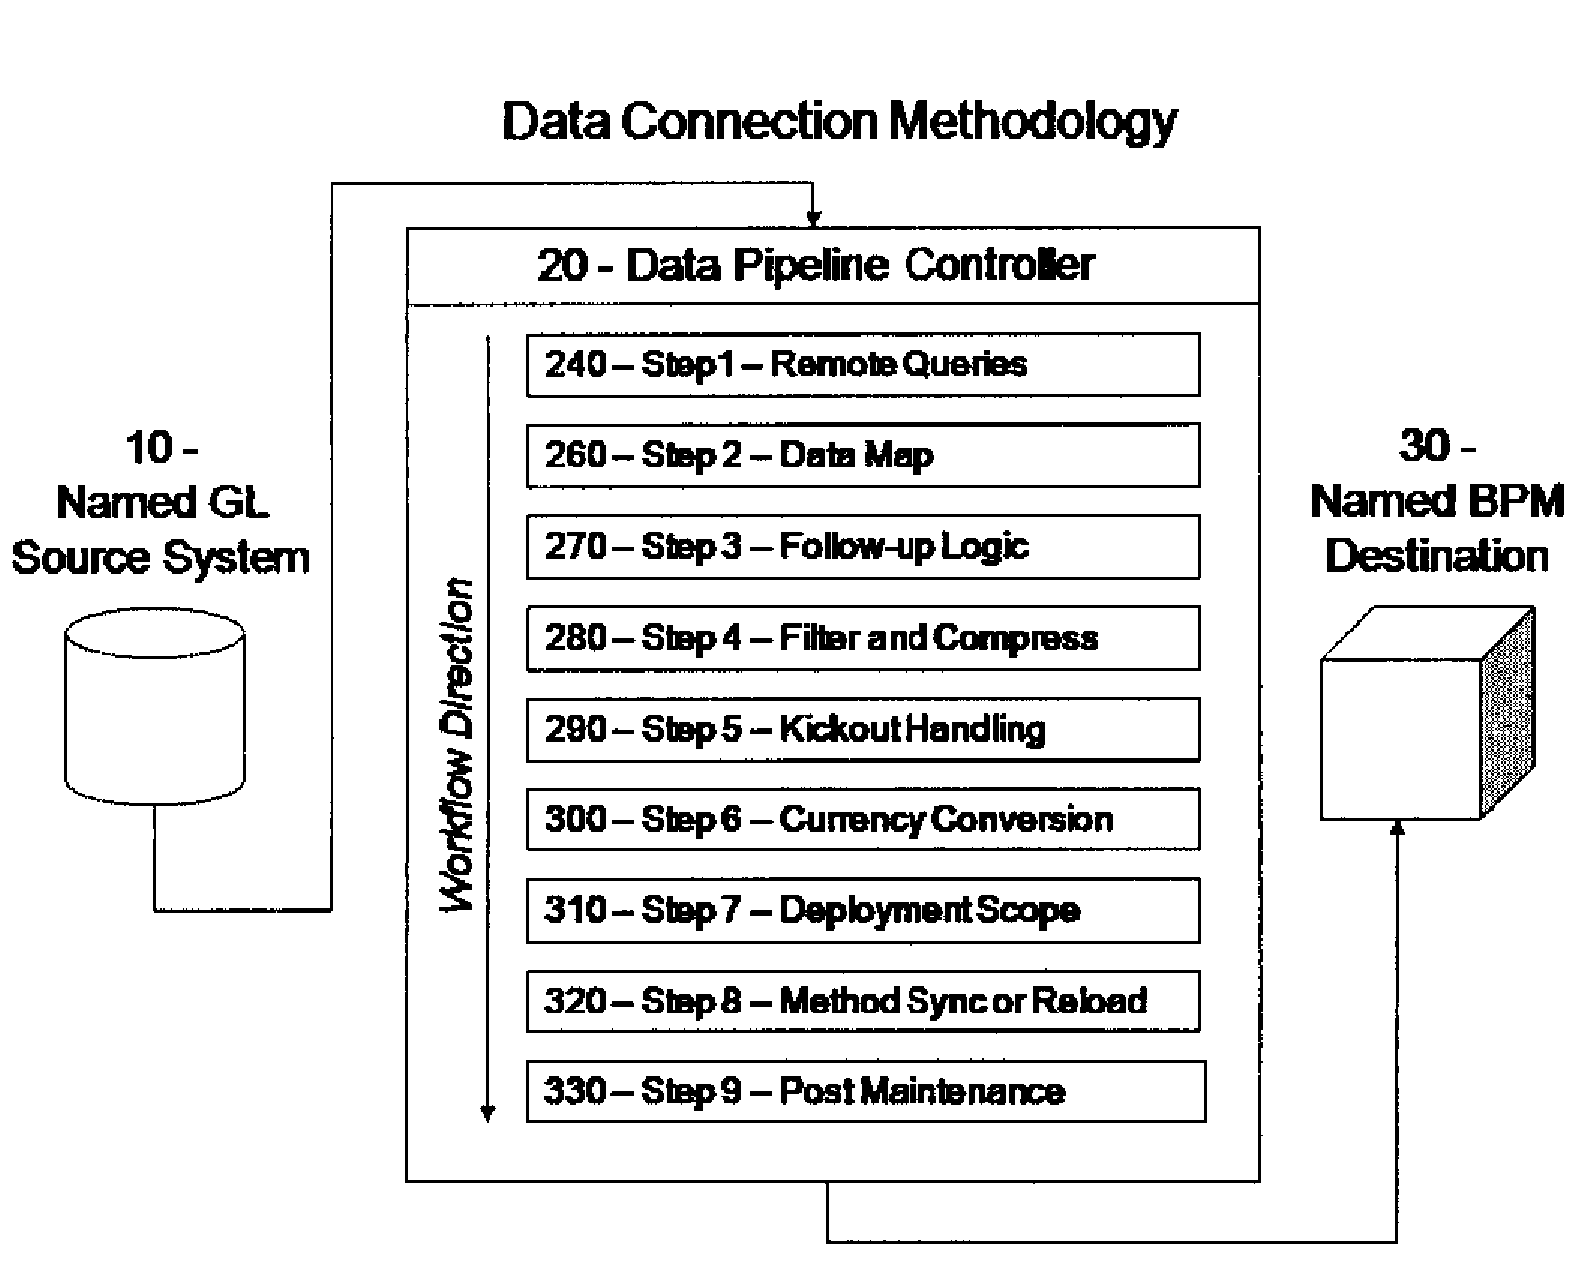 System and method of data movement between a data source and a destination